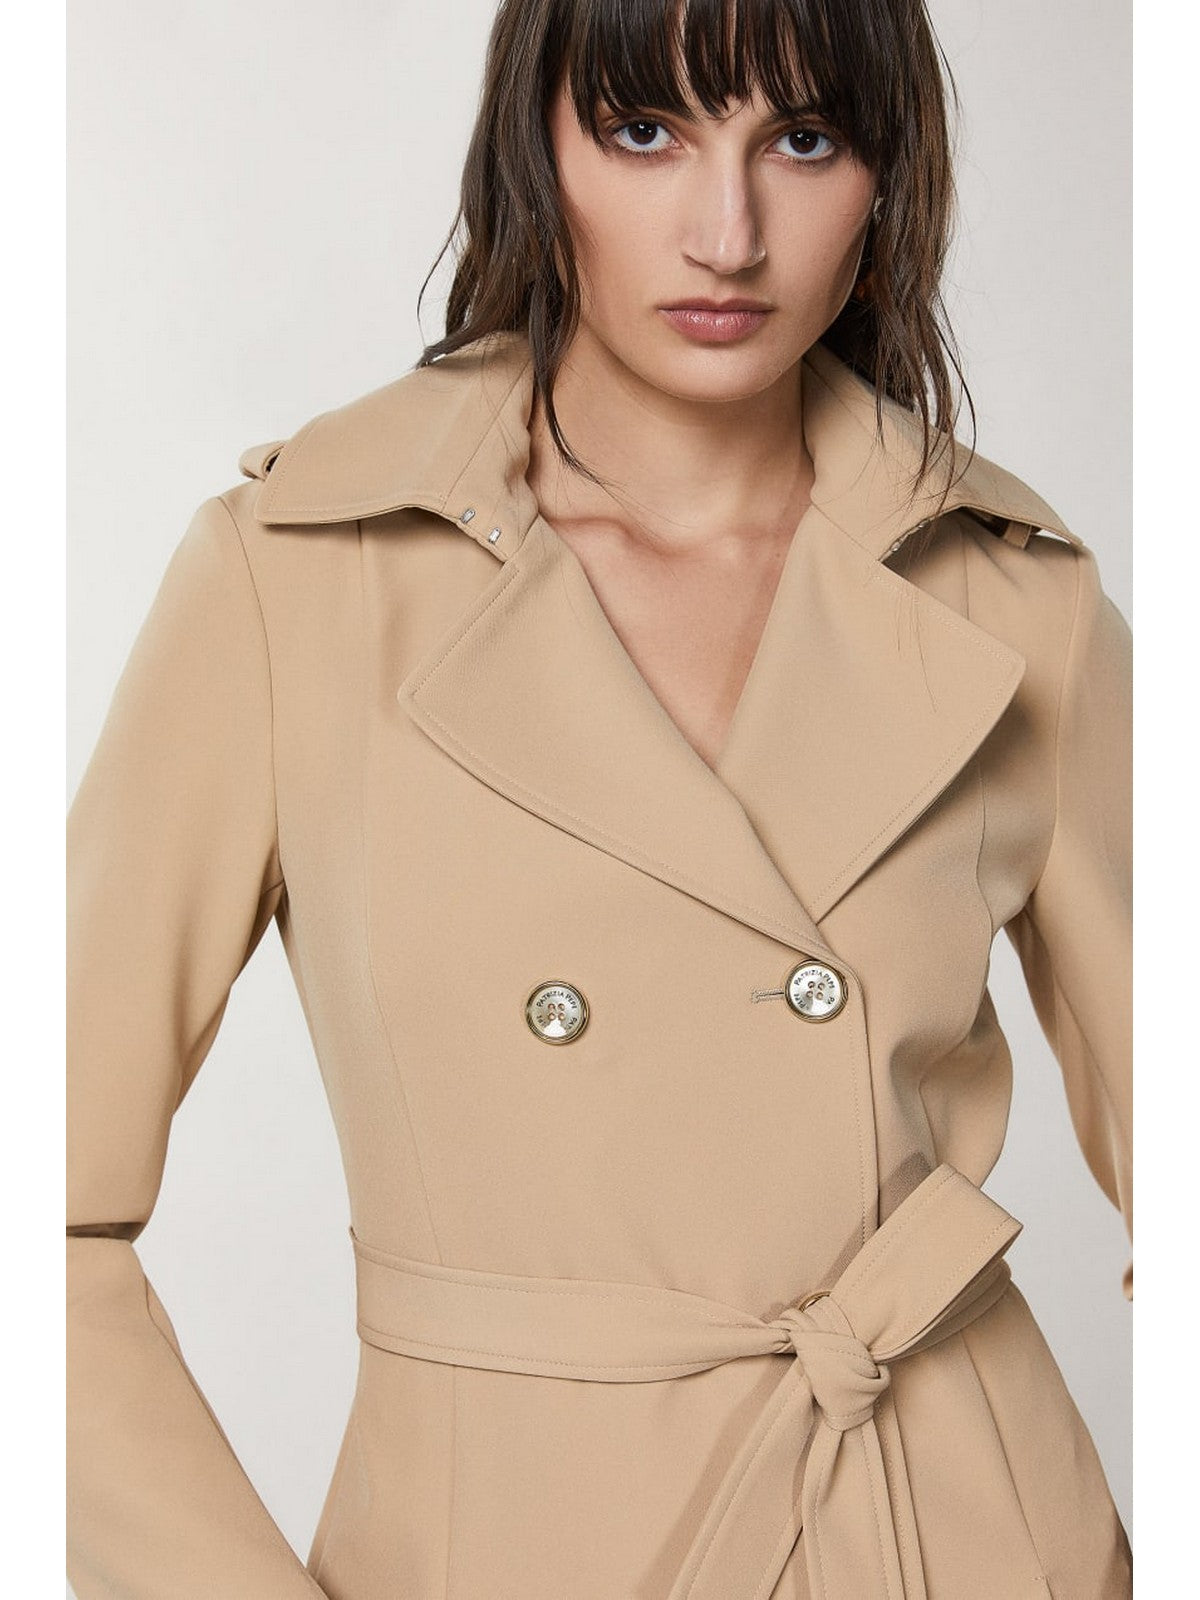 PATRIZIA PEPE Trench femme CO0188 A2AW B663 Beige